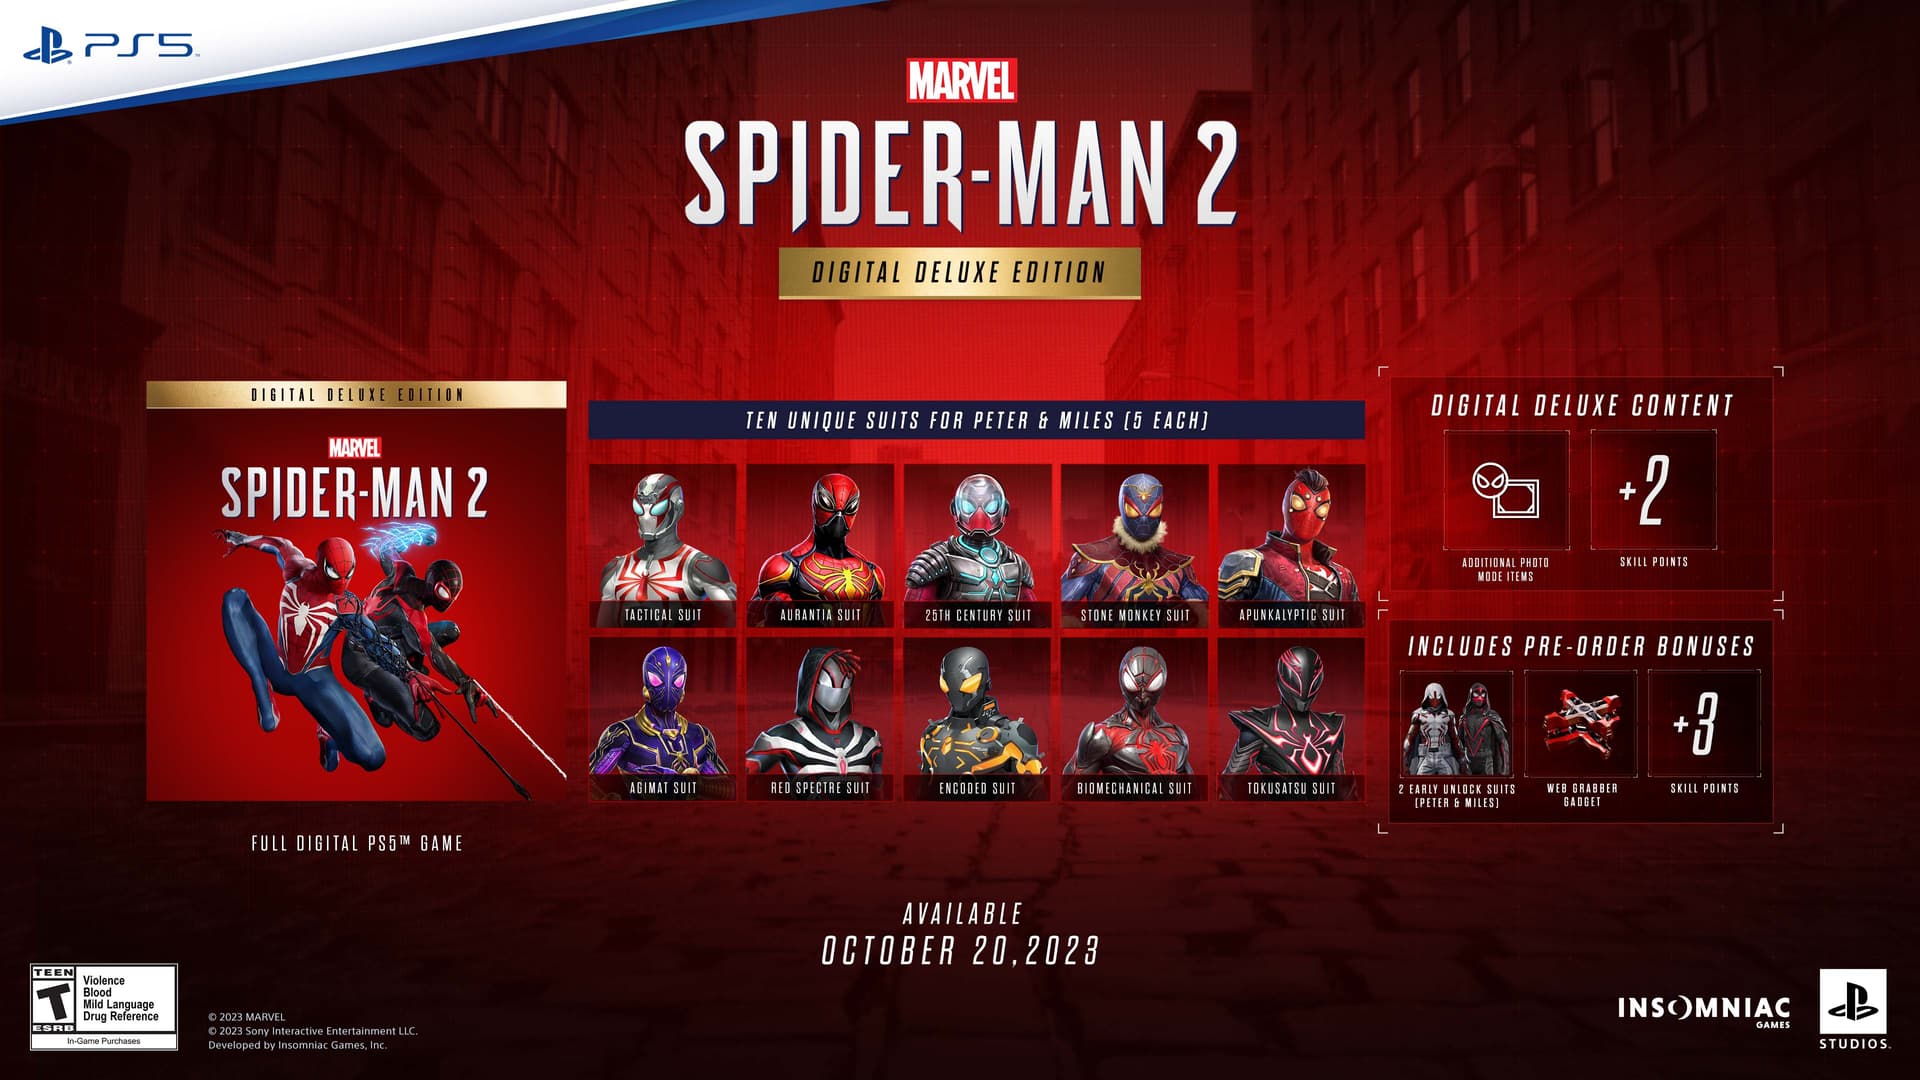 10 Unique Suits that come with Digital Deluxe Edition of Spider-Man 2